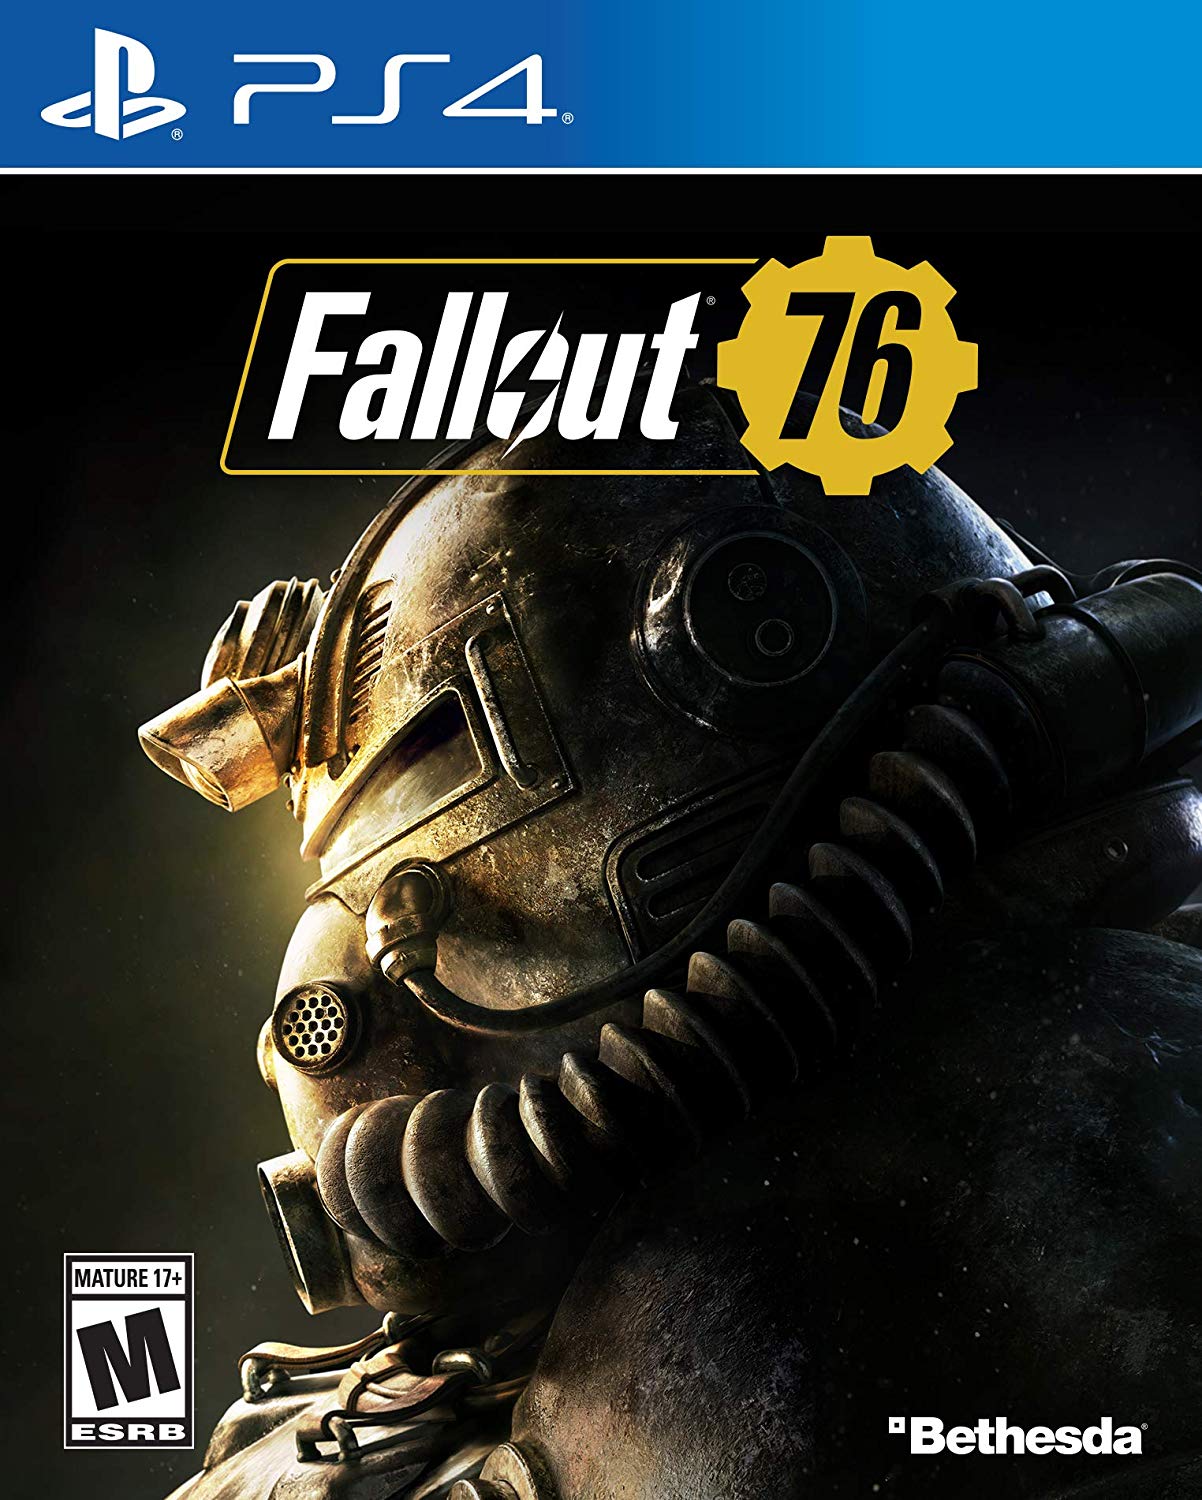 Fallout 76 Preorder Guide